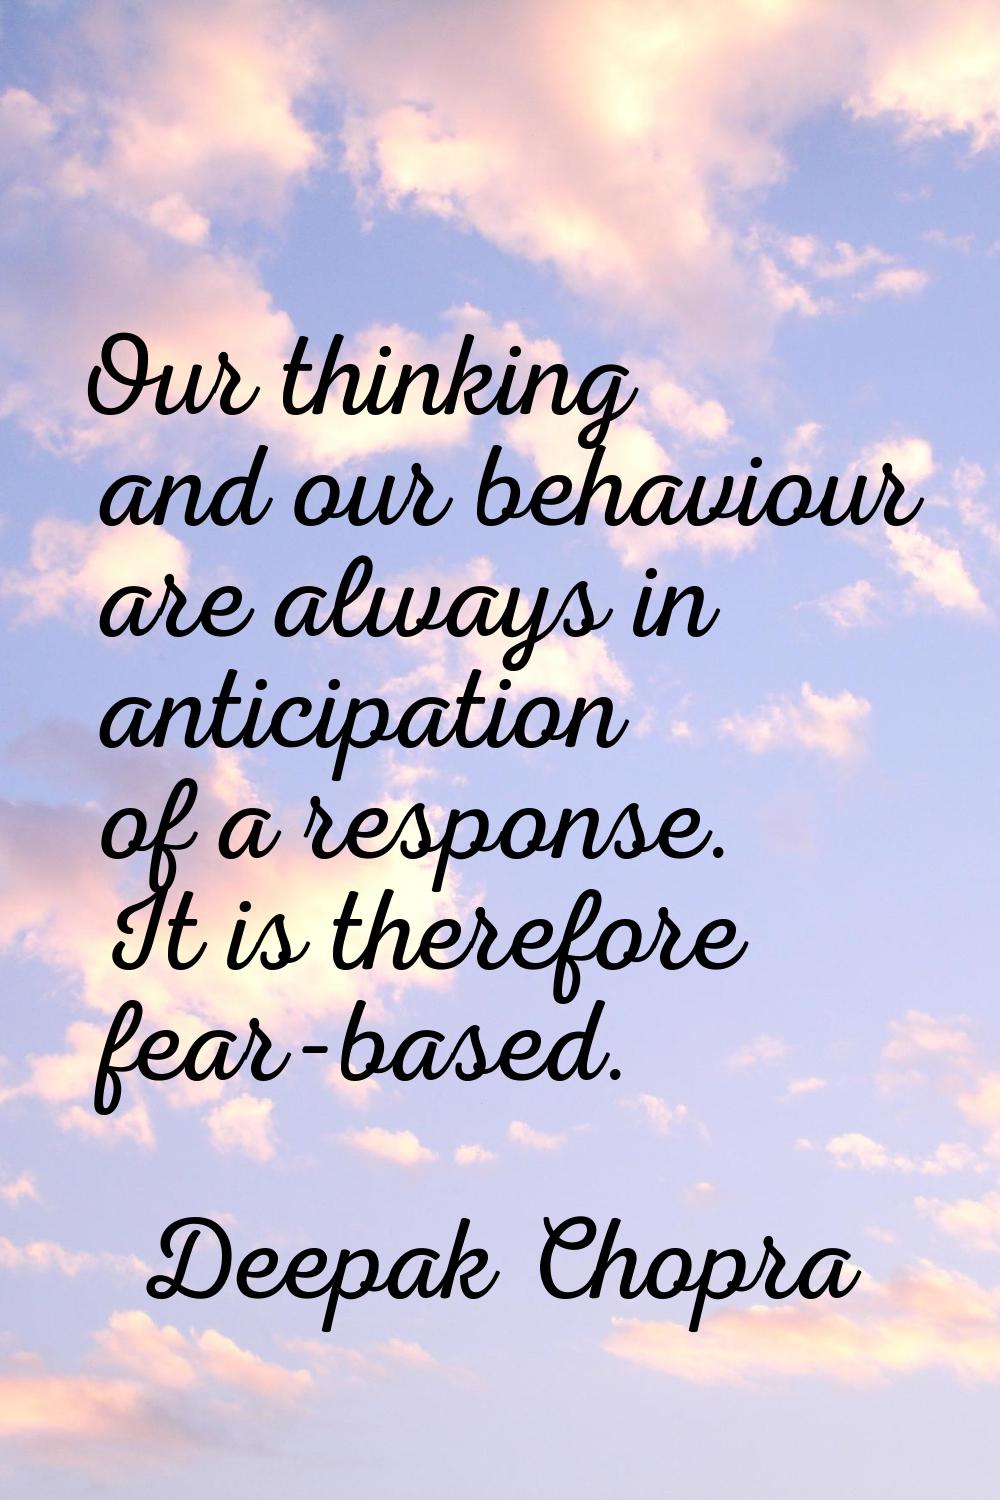 Our thinking and our behaviour are always in anticipation of a response. It is therefore fear-based